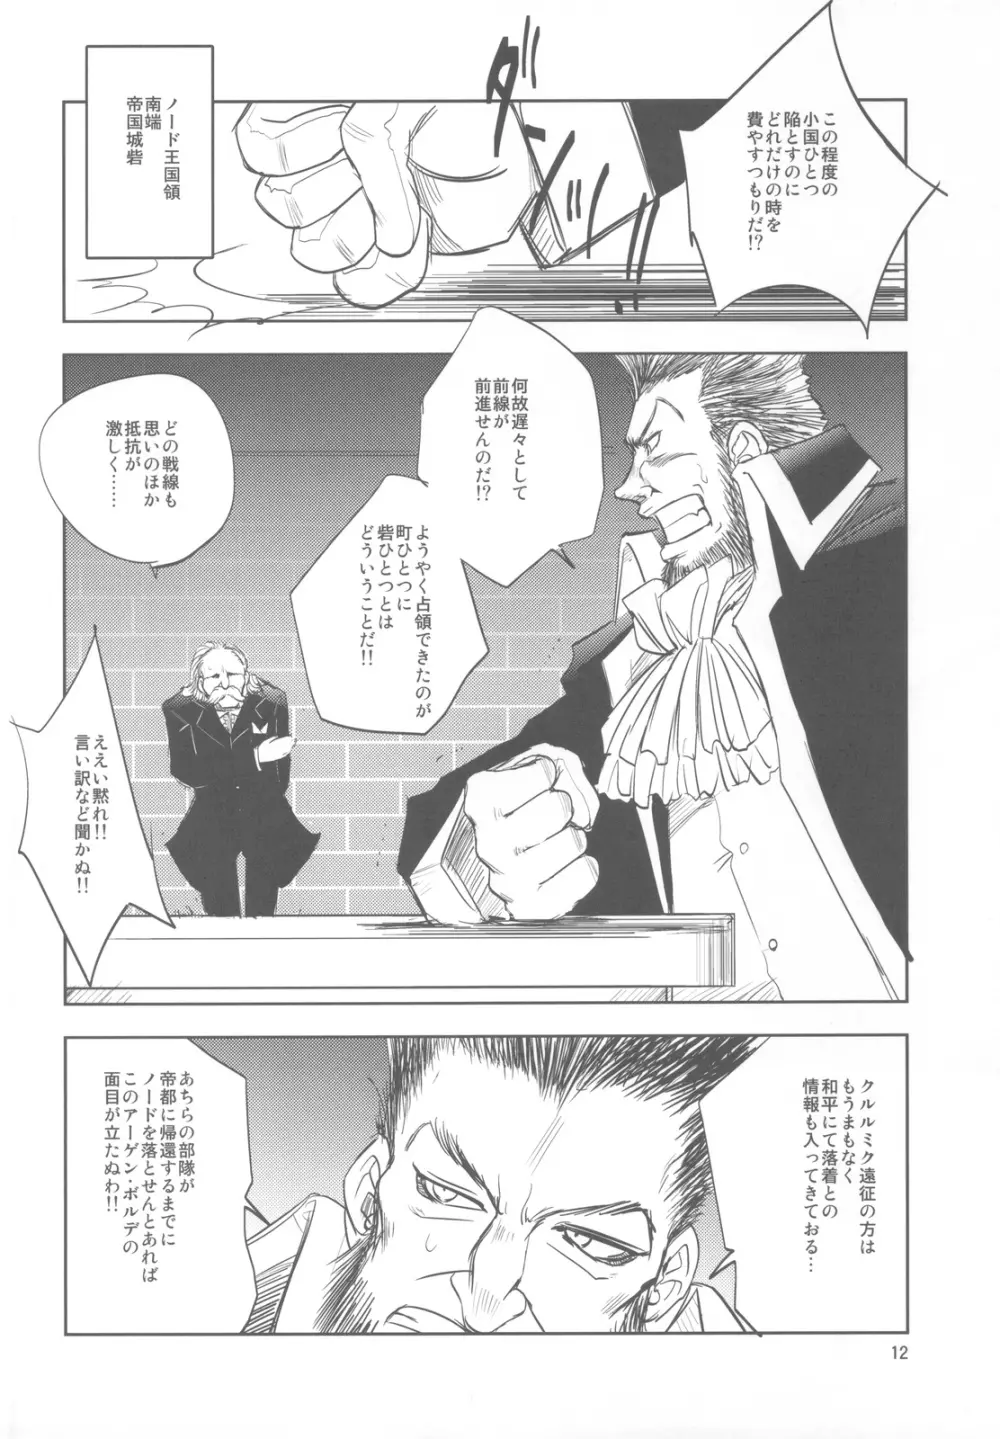 GRASSEN'S WAR ANOTHER STORY Ex #01 ノード侵攻 I Page.11